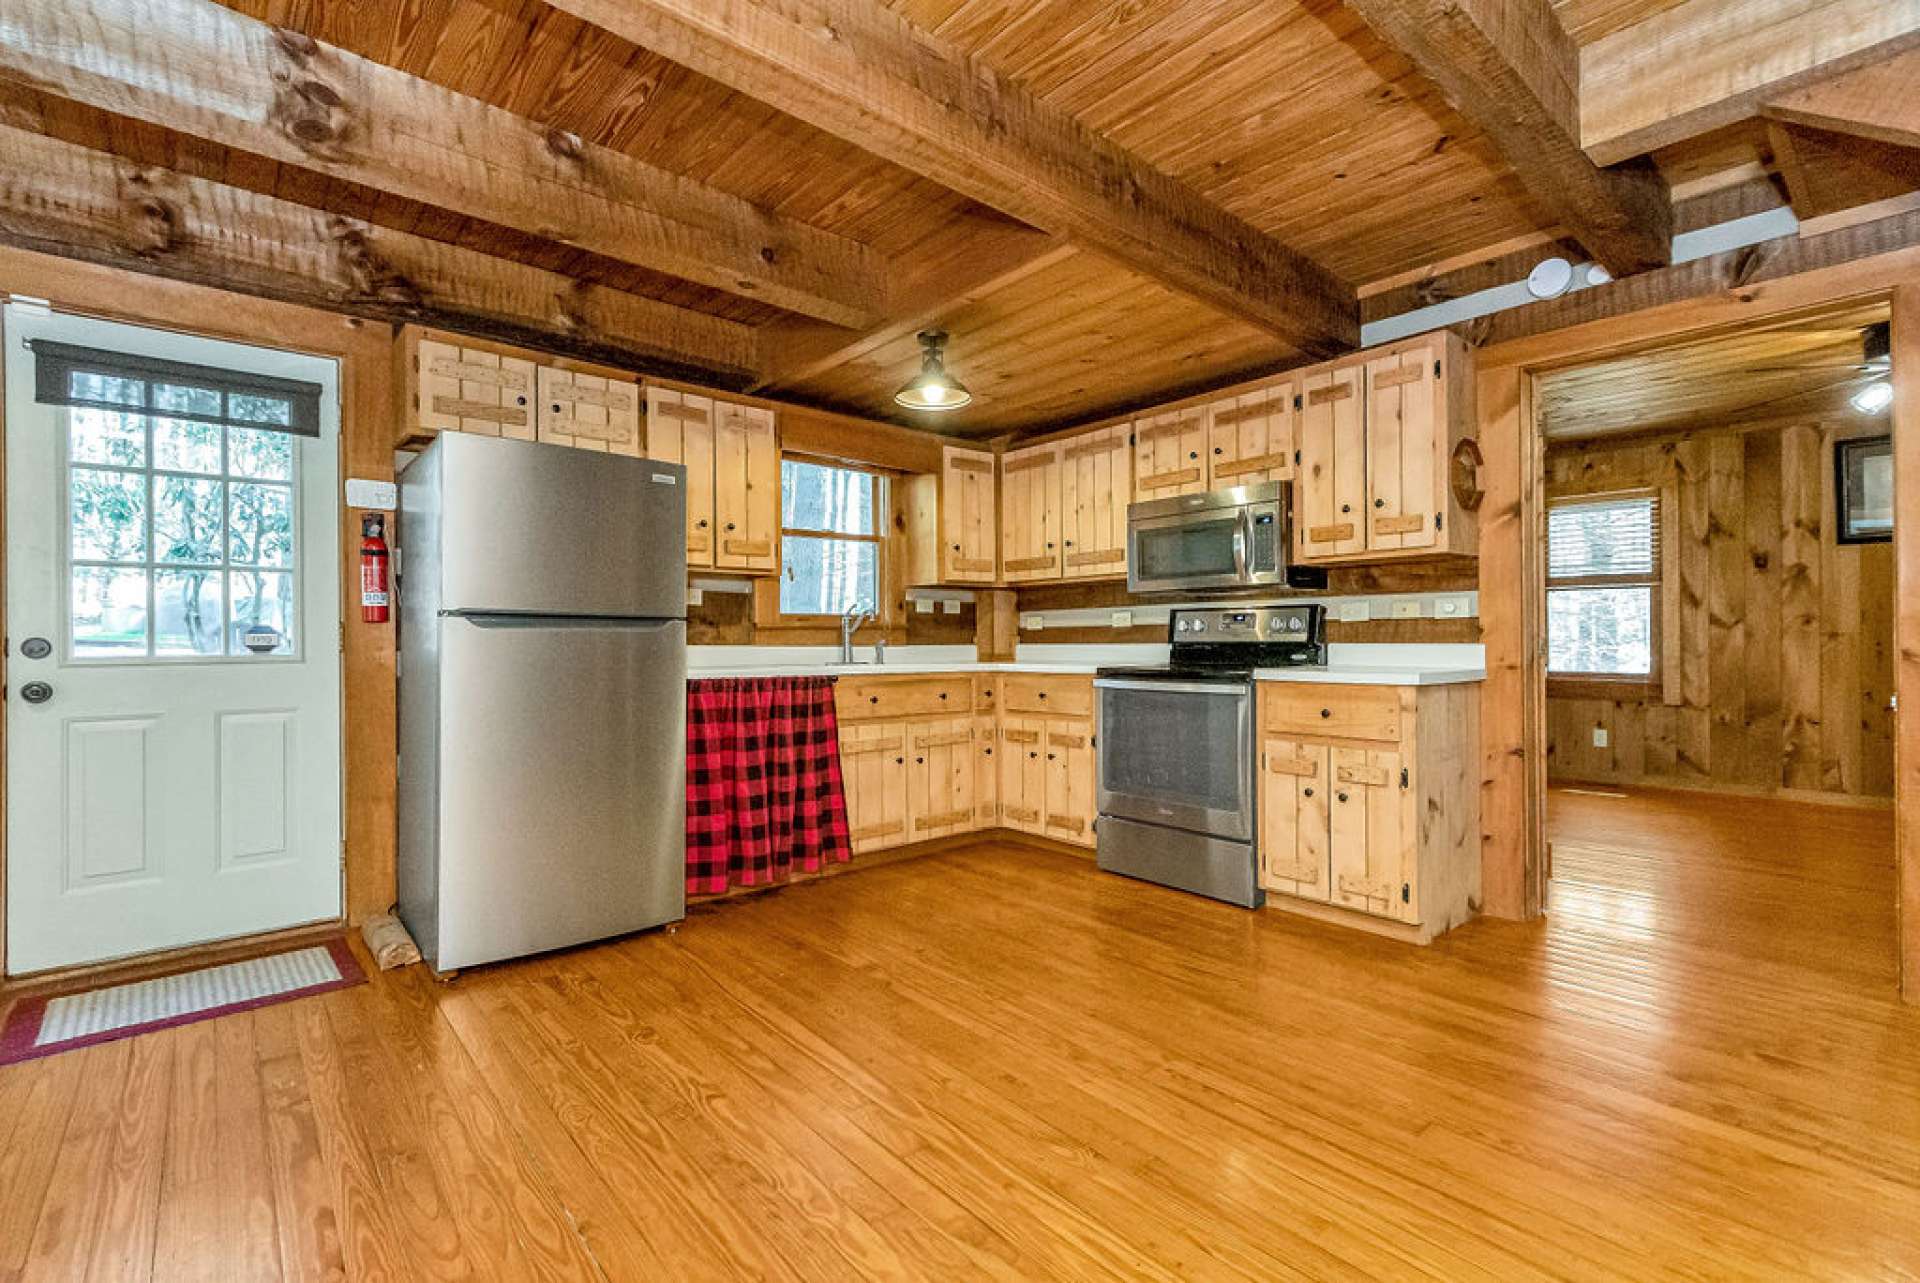 The kitchen features stainless appliances and hand-crafted rustic cabinetry.